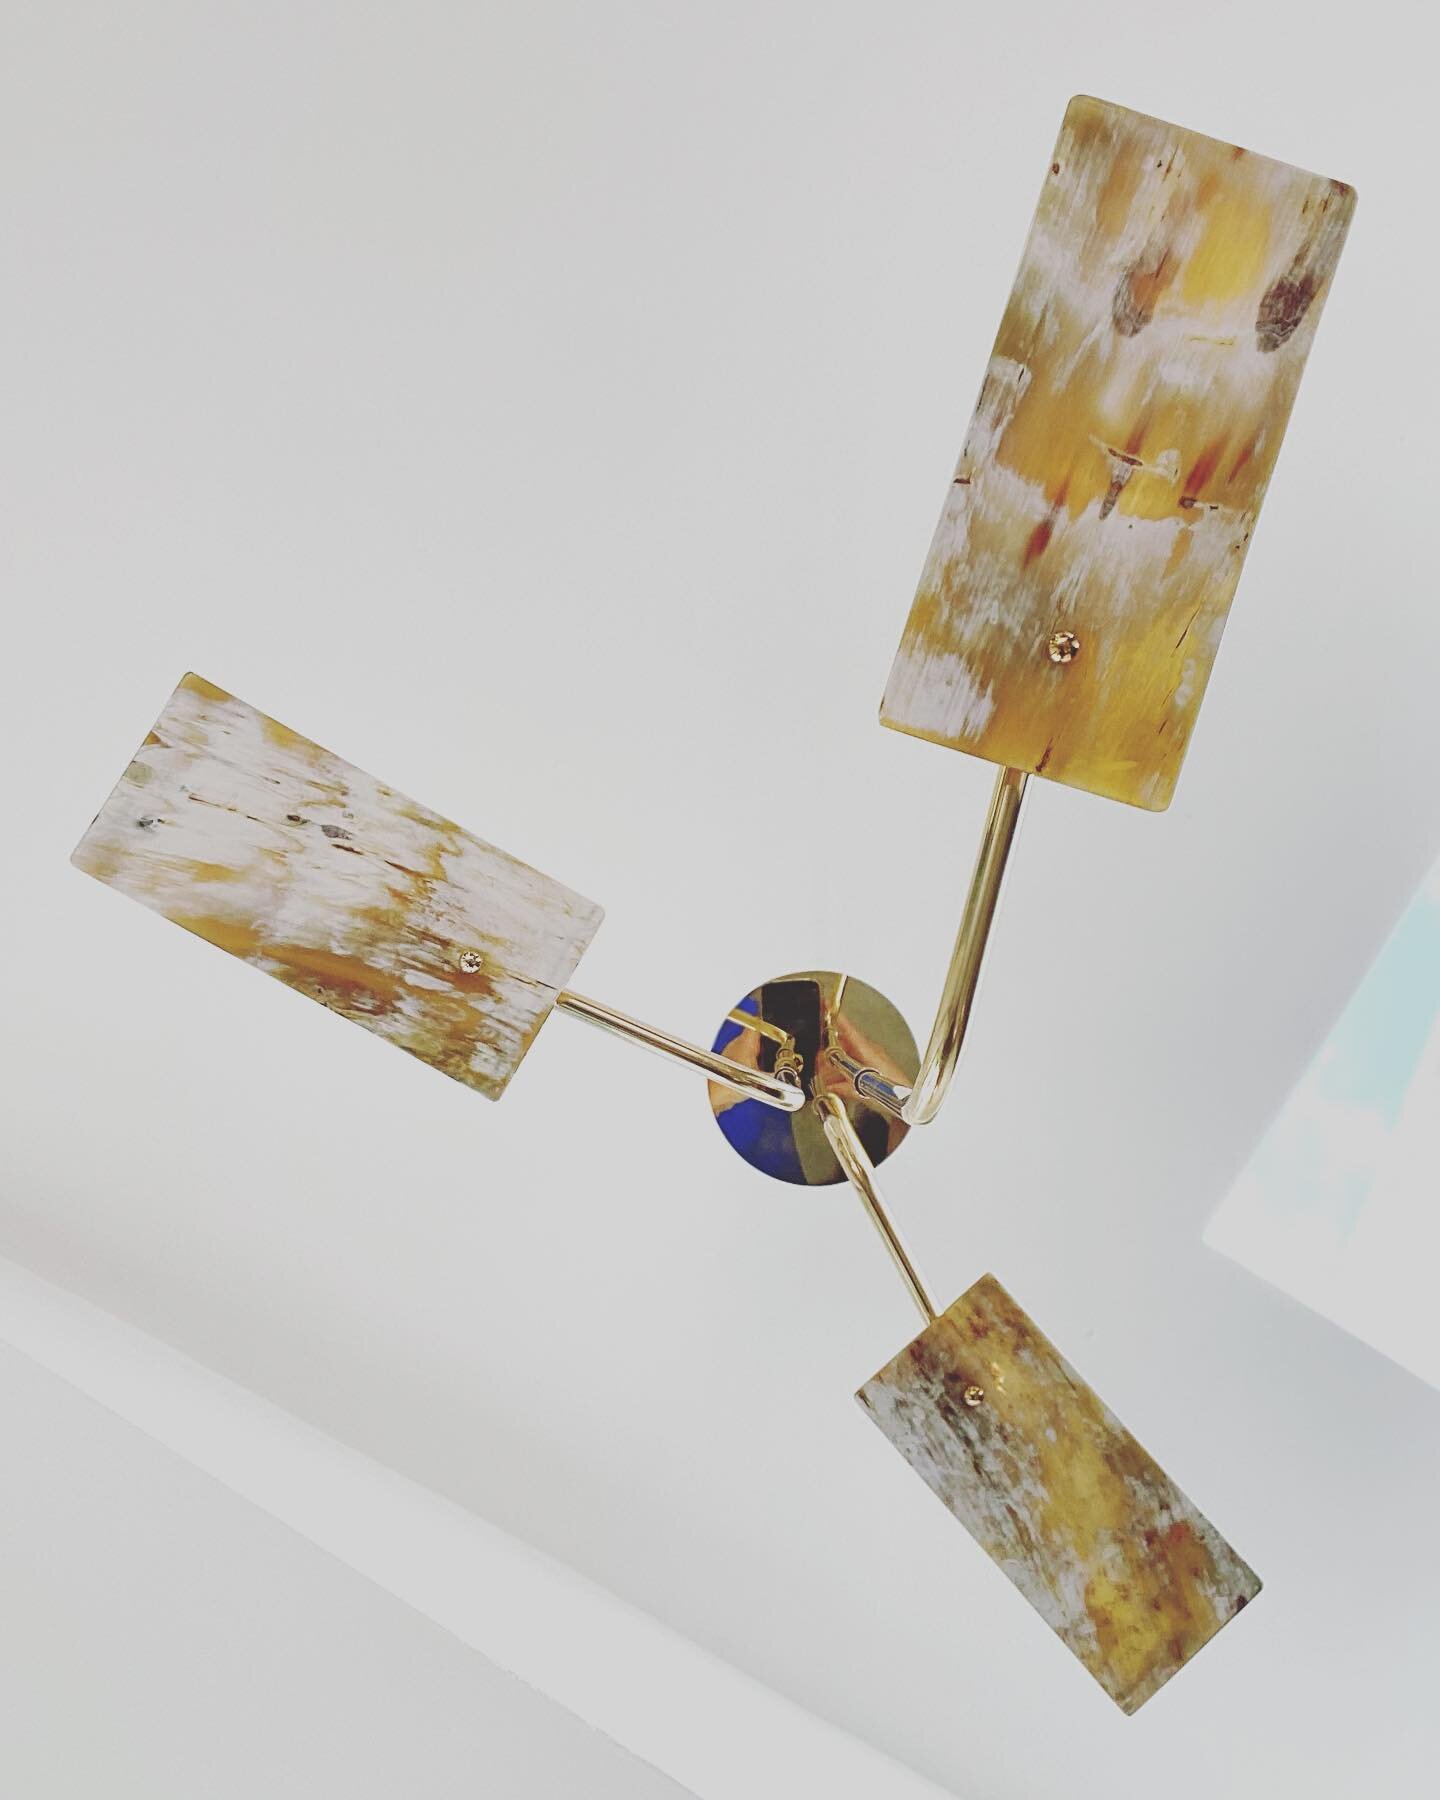 Elegant and delicate  3 armed pendant.
Horn and brass, uplight and so pretty when light shines through this gorgeous cream horn, like #alabaster.
G9 bulbs hidden in frosted opal glass tubes.
#pendant 
#chandelier 
#contemporarychandelier 
#charlottep